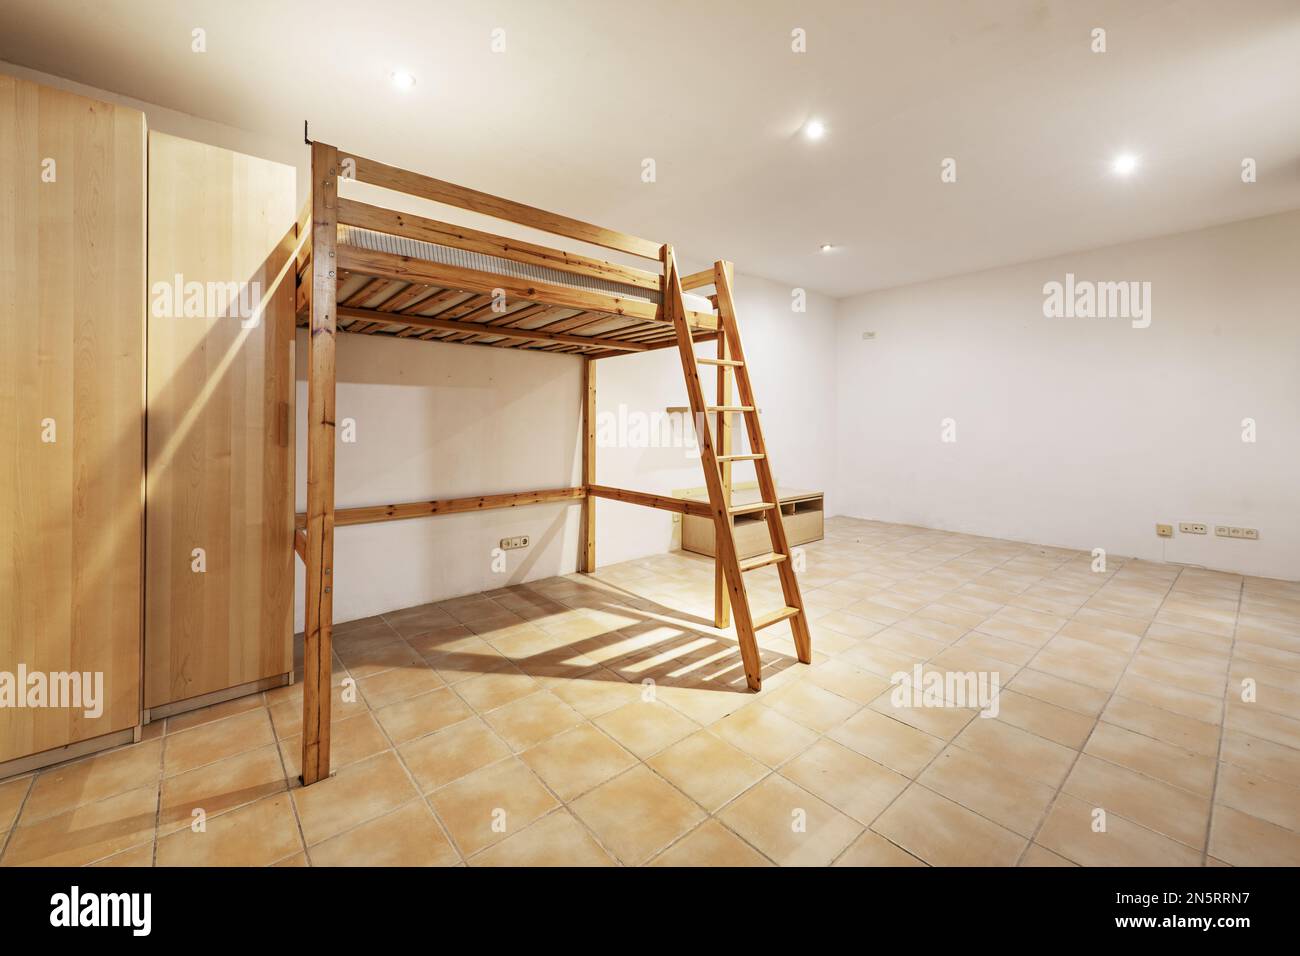 Studio apartment with a double bed on a raised wooden frame with a ladder and cupboards in one corner Stock Photo